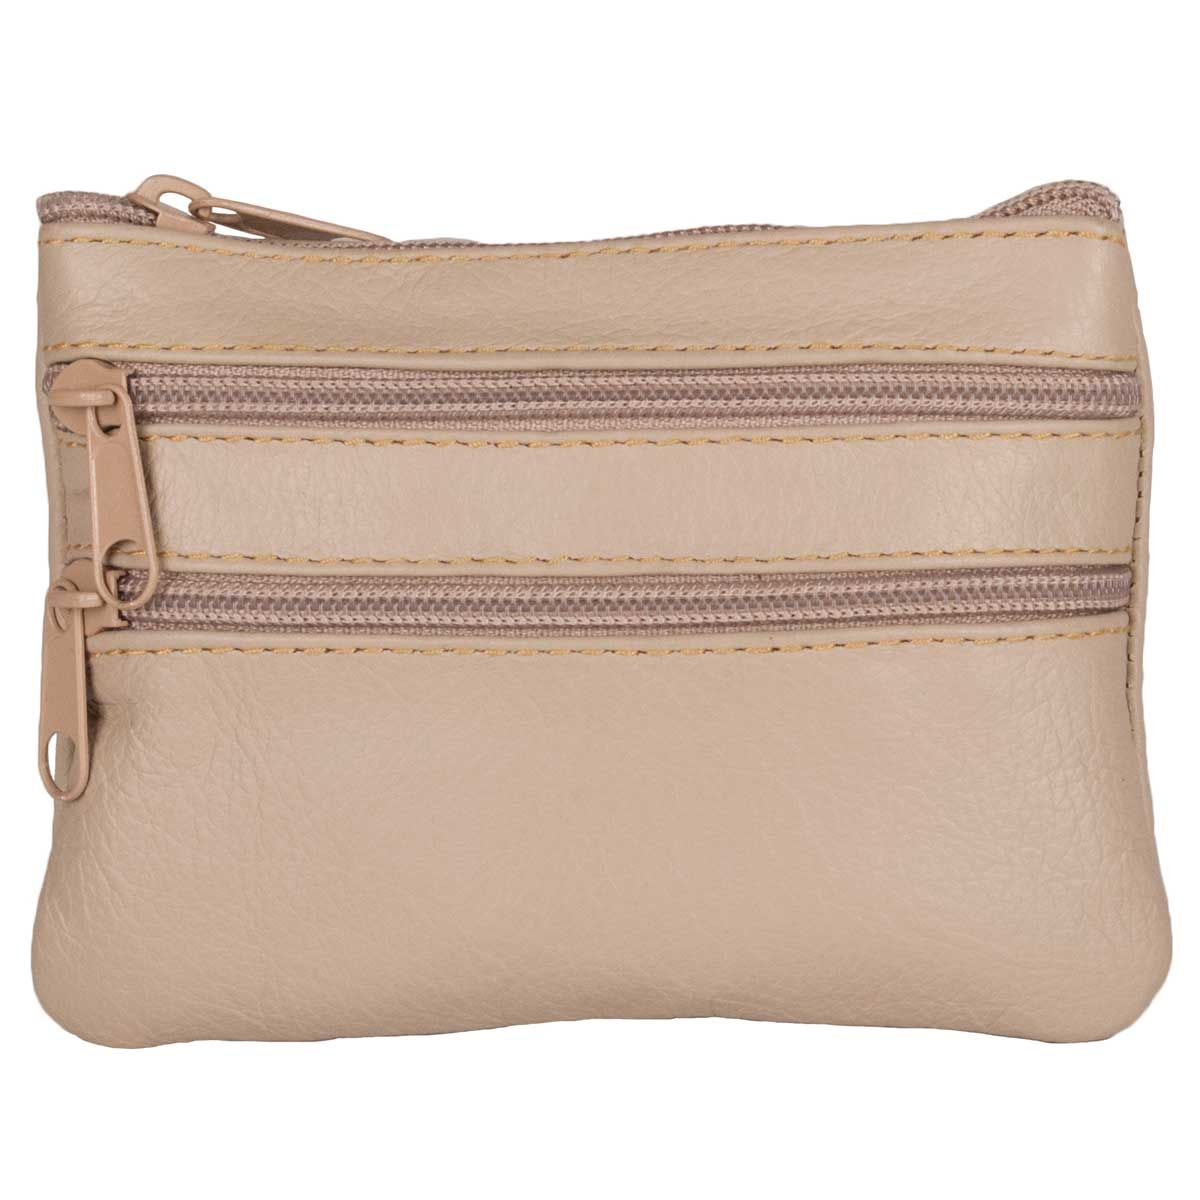 Measure: 7 * 10 * 1 cm. Women's purse, made of leather with zipper closure. It is very flexible and easy to clean. It has two exterior pockets with zip. Interior lined with textile. Very practical and comfortable. 100% natural skin. MADE IN SPAIN.